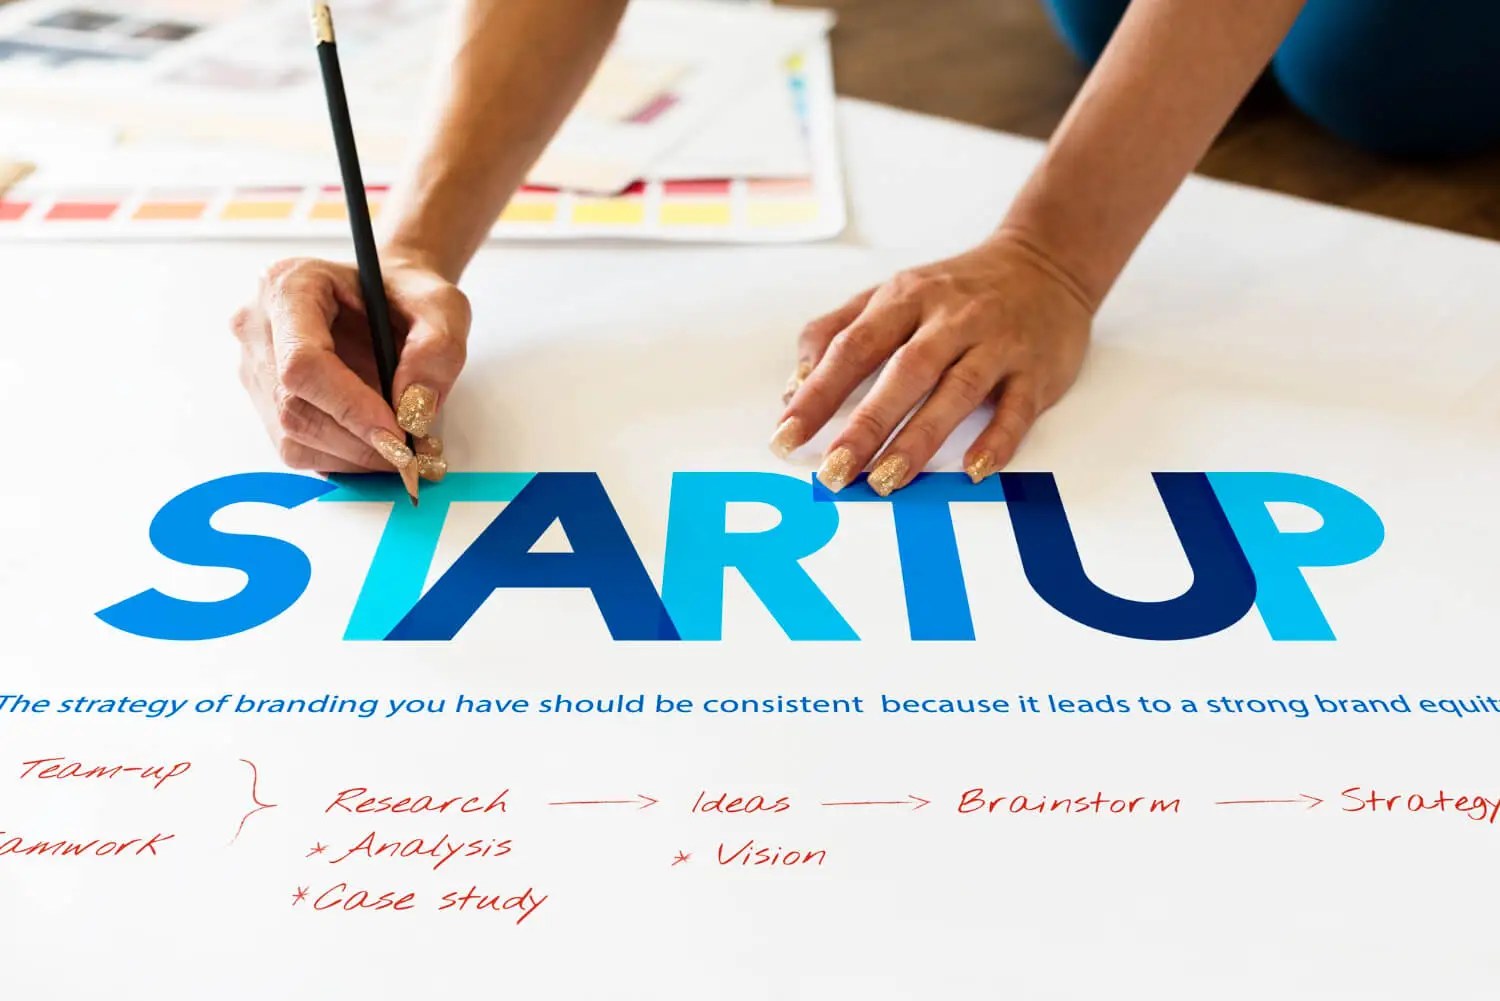 What Are The Differences Between Entrepreneurship and Start-up?